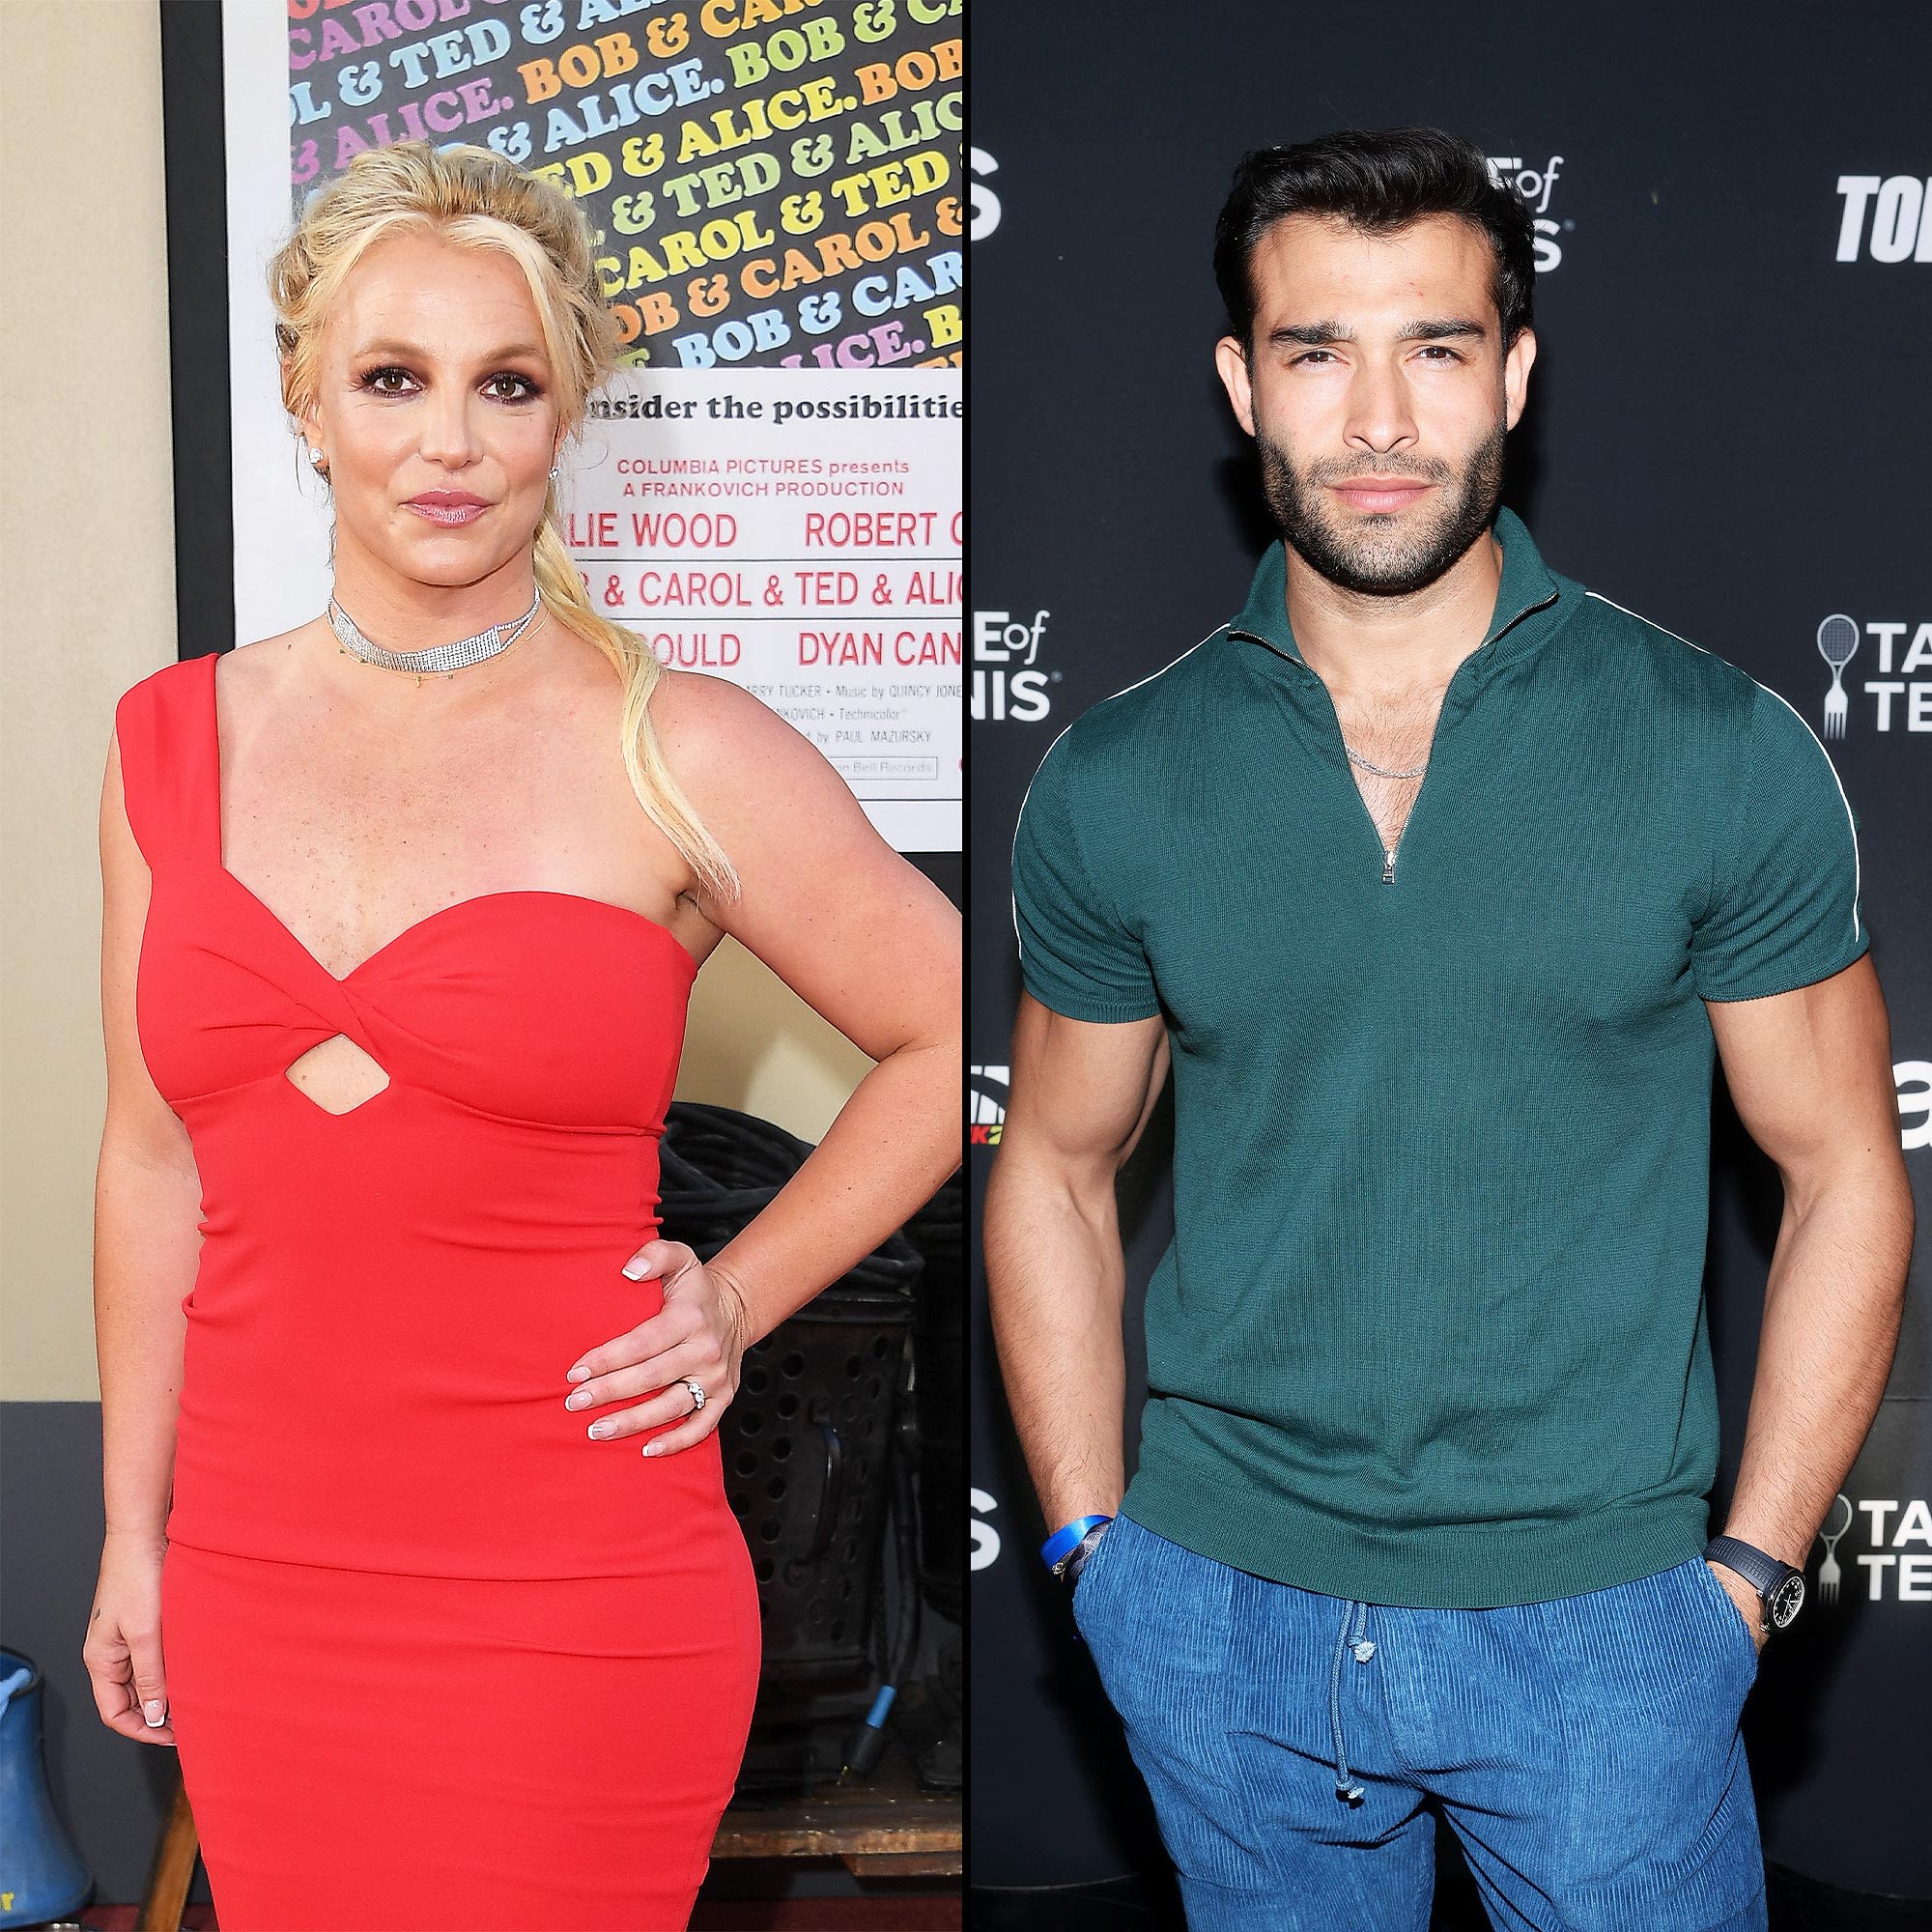 Britney Spears’ Ex-Husband Sam Asghari Shares Shirtless Update After Her Recent Chateau Marmont Scare